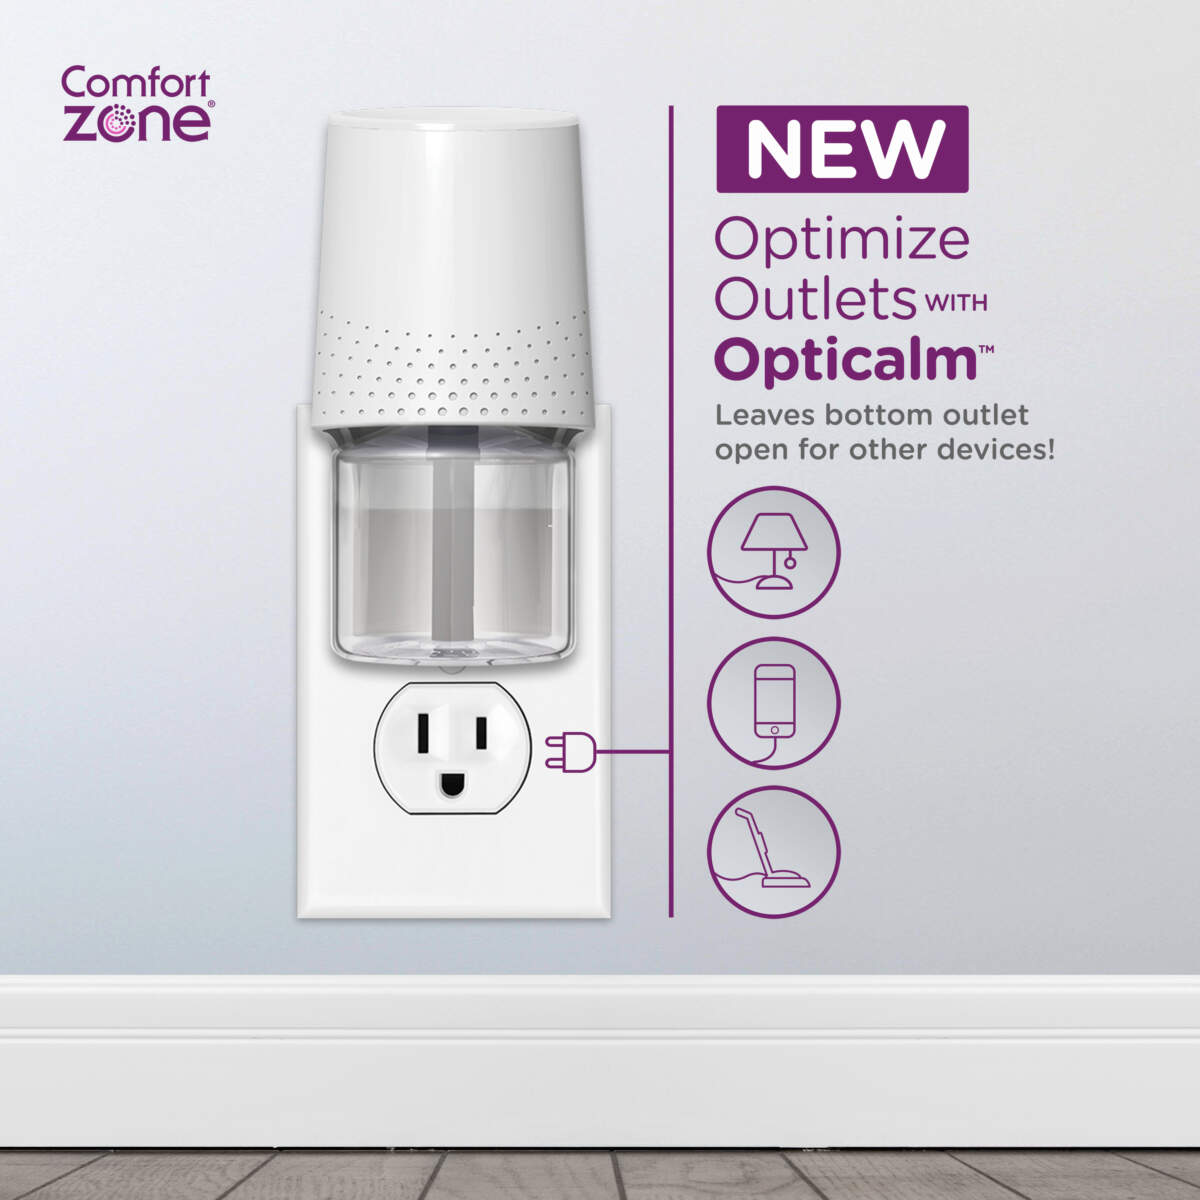 The new Comfort Zone Opticalm Diffuser optimizes outlet space.